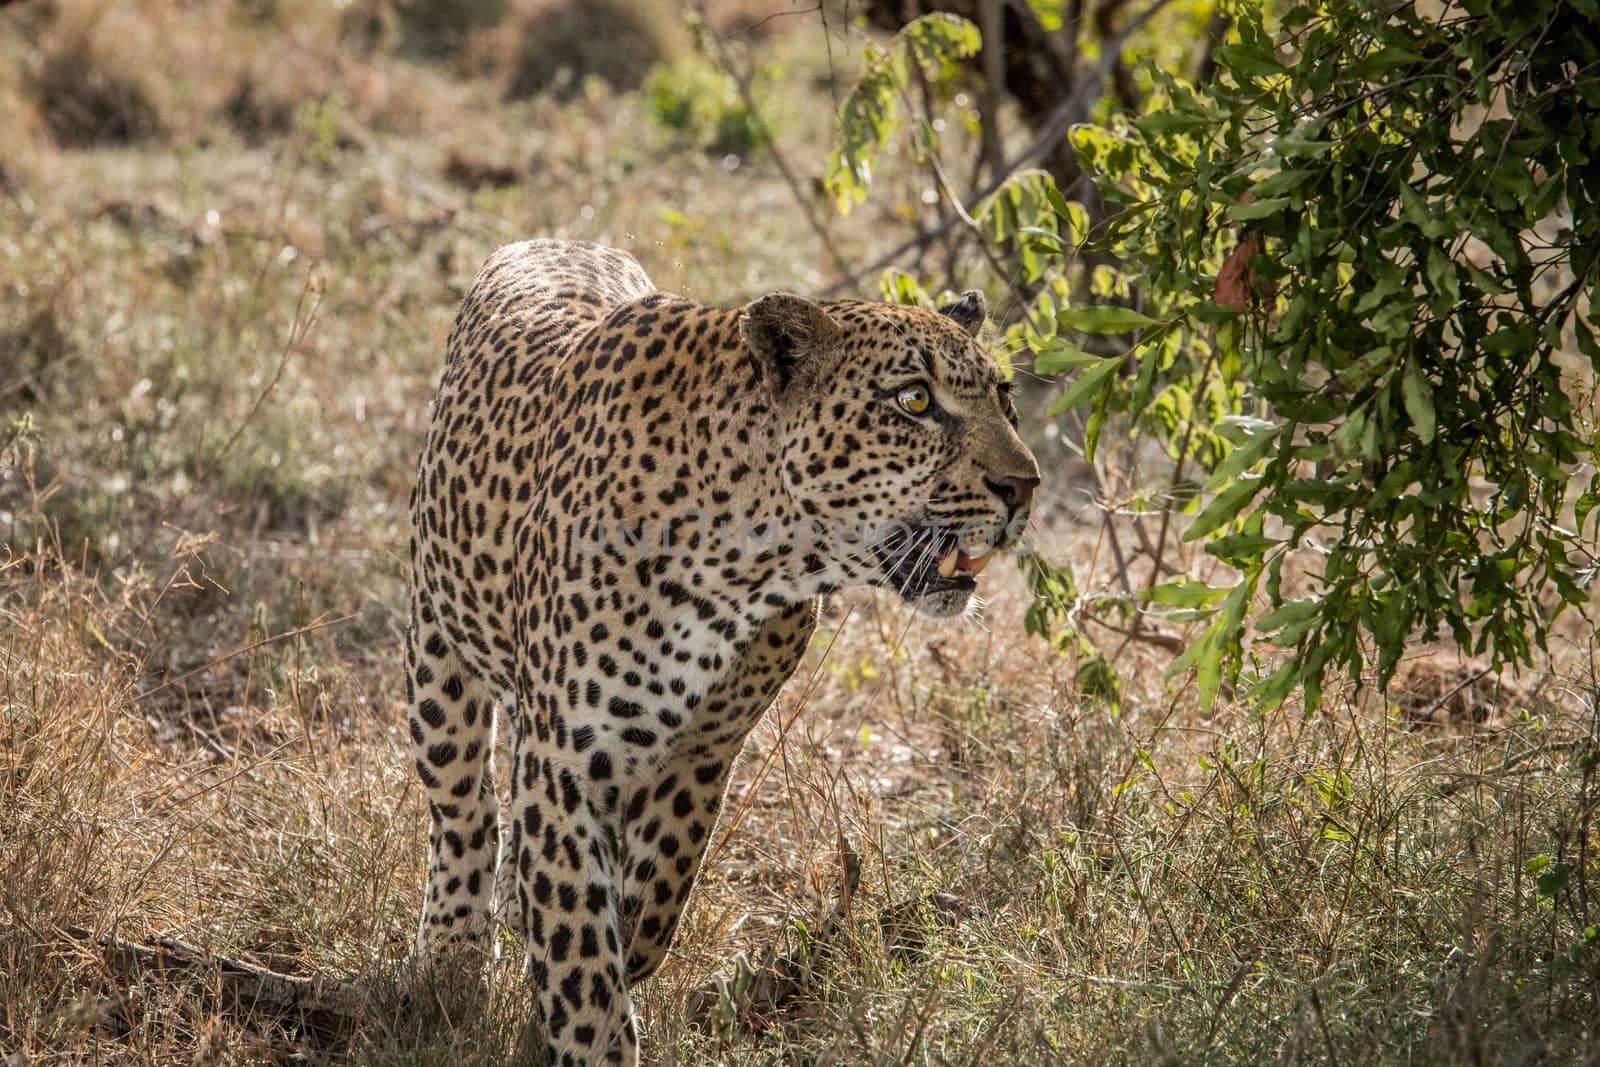 Walking Leopard in the Kruger National Park, South Africa. by Simoneemanphotography